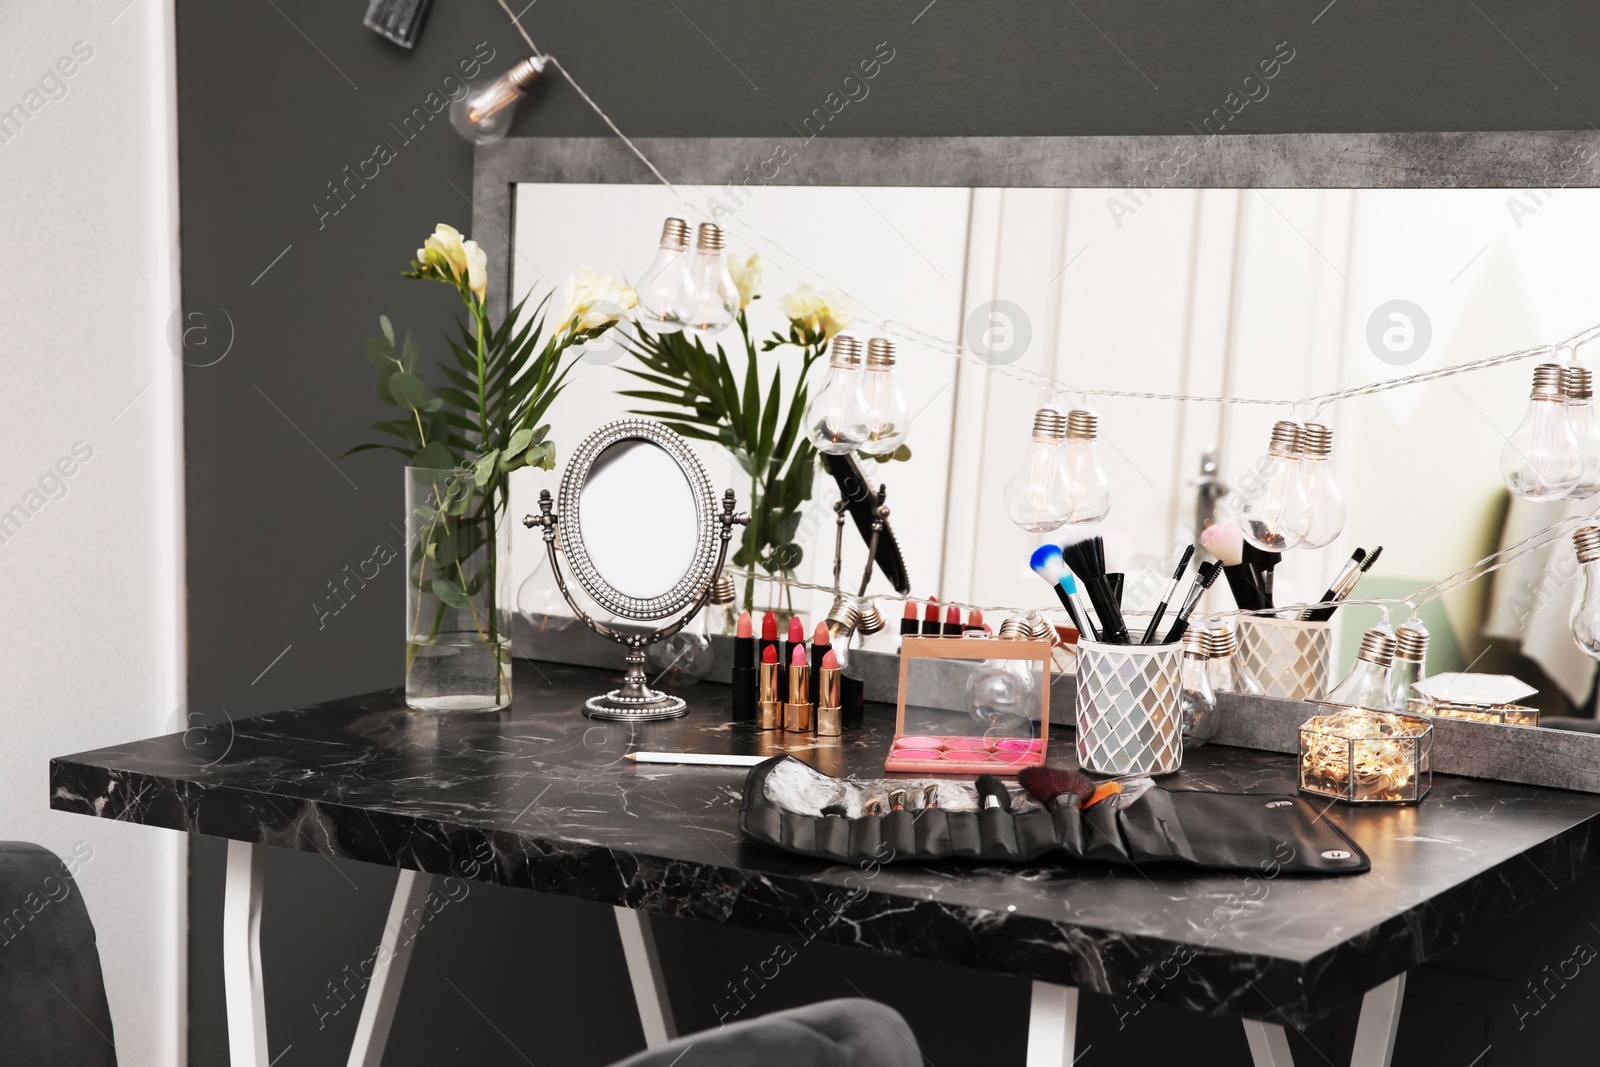 Photo of Decorative cosmetics and tools on dressing table in makeup room